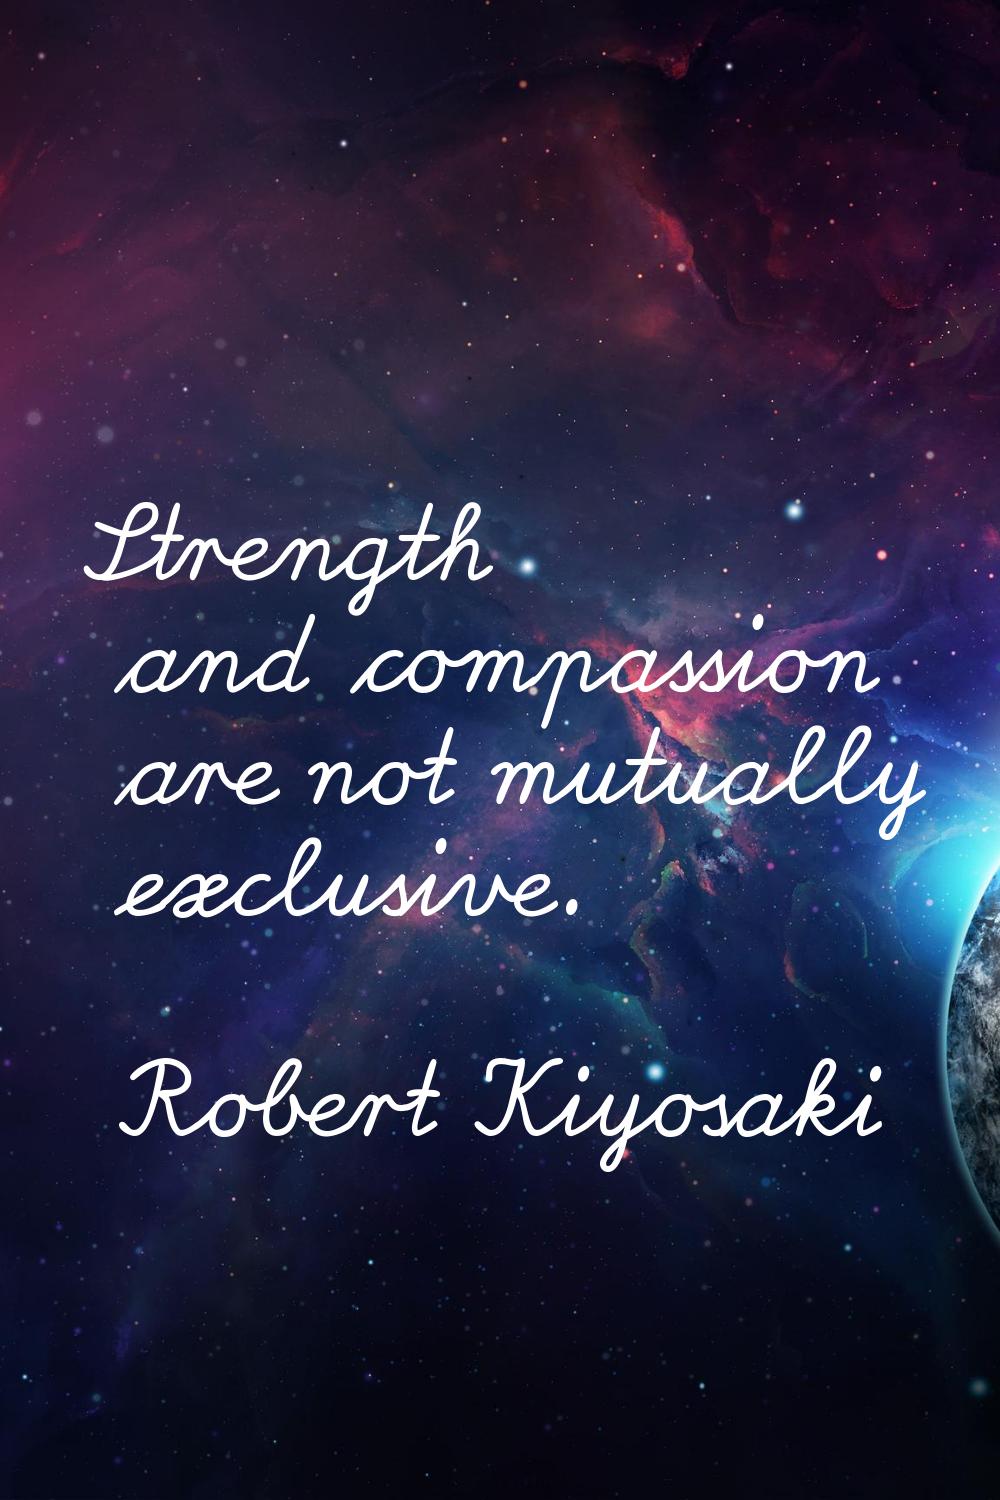 Strength and compassion are not mutually exclusive.